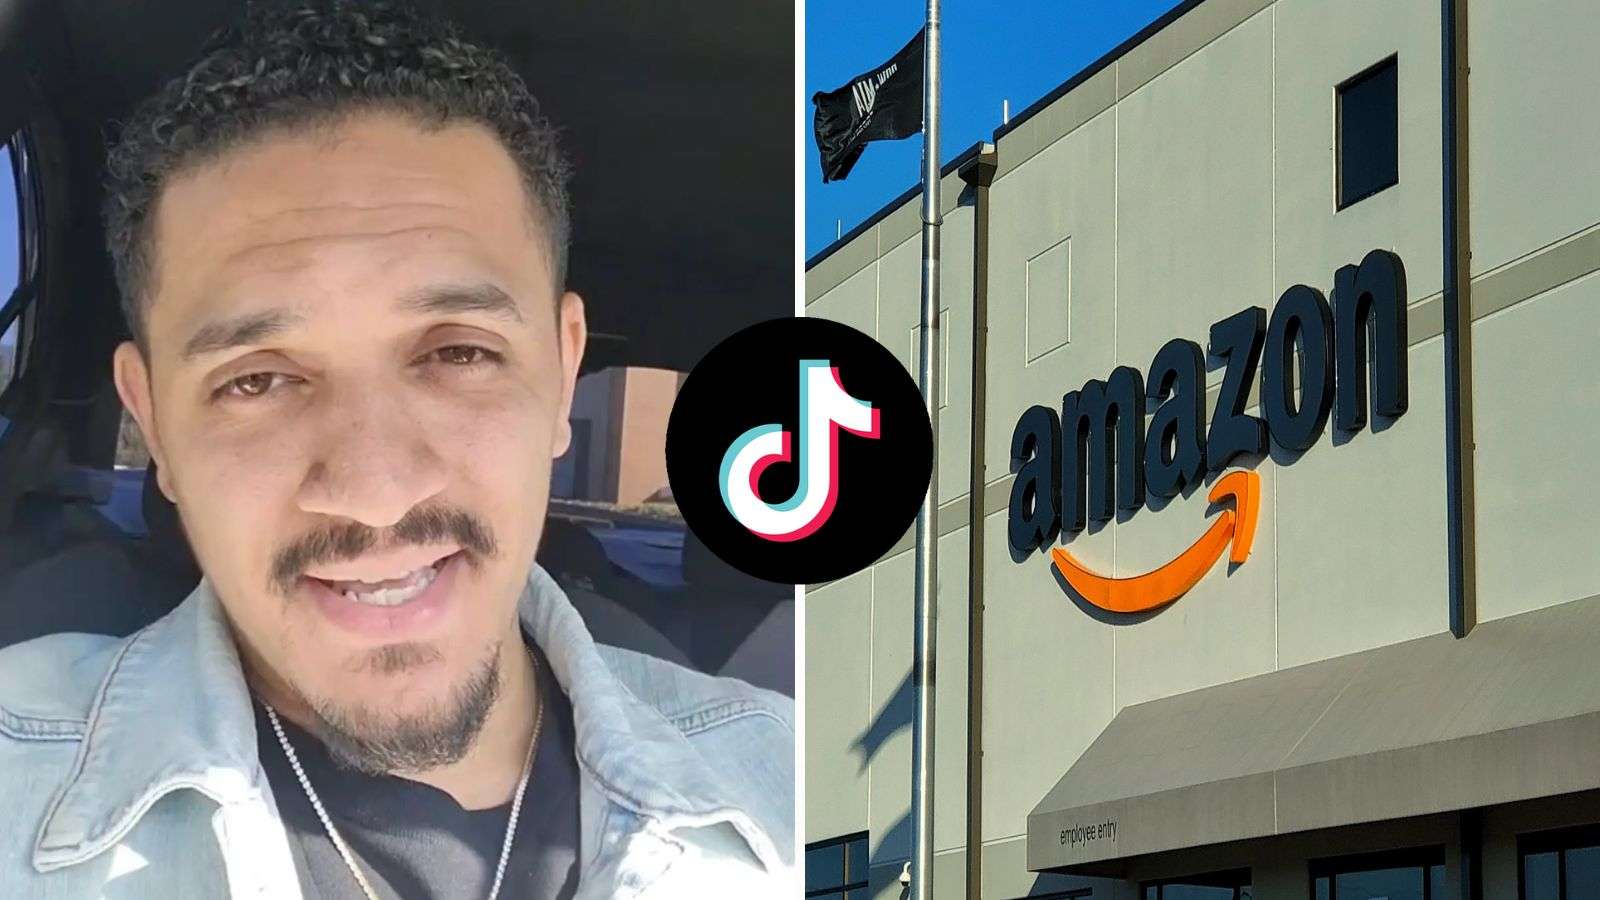 Amazon worker fired after complaining about lifting heavy items on TikTok